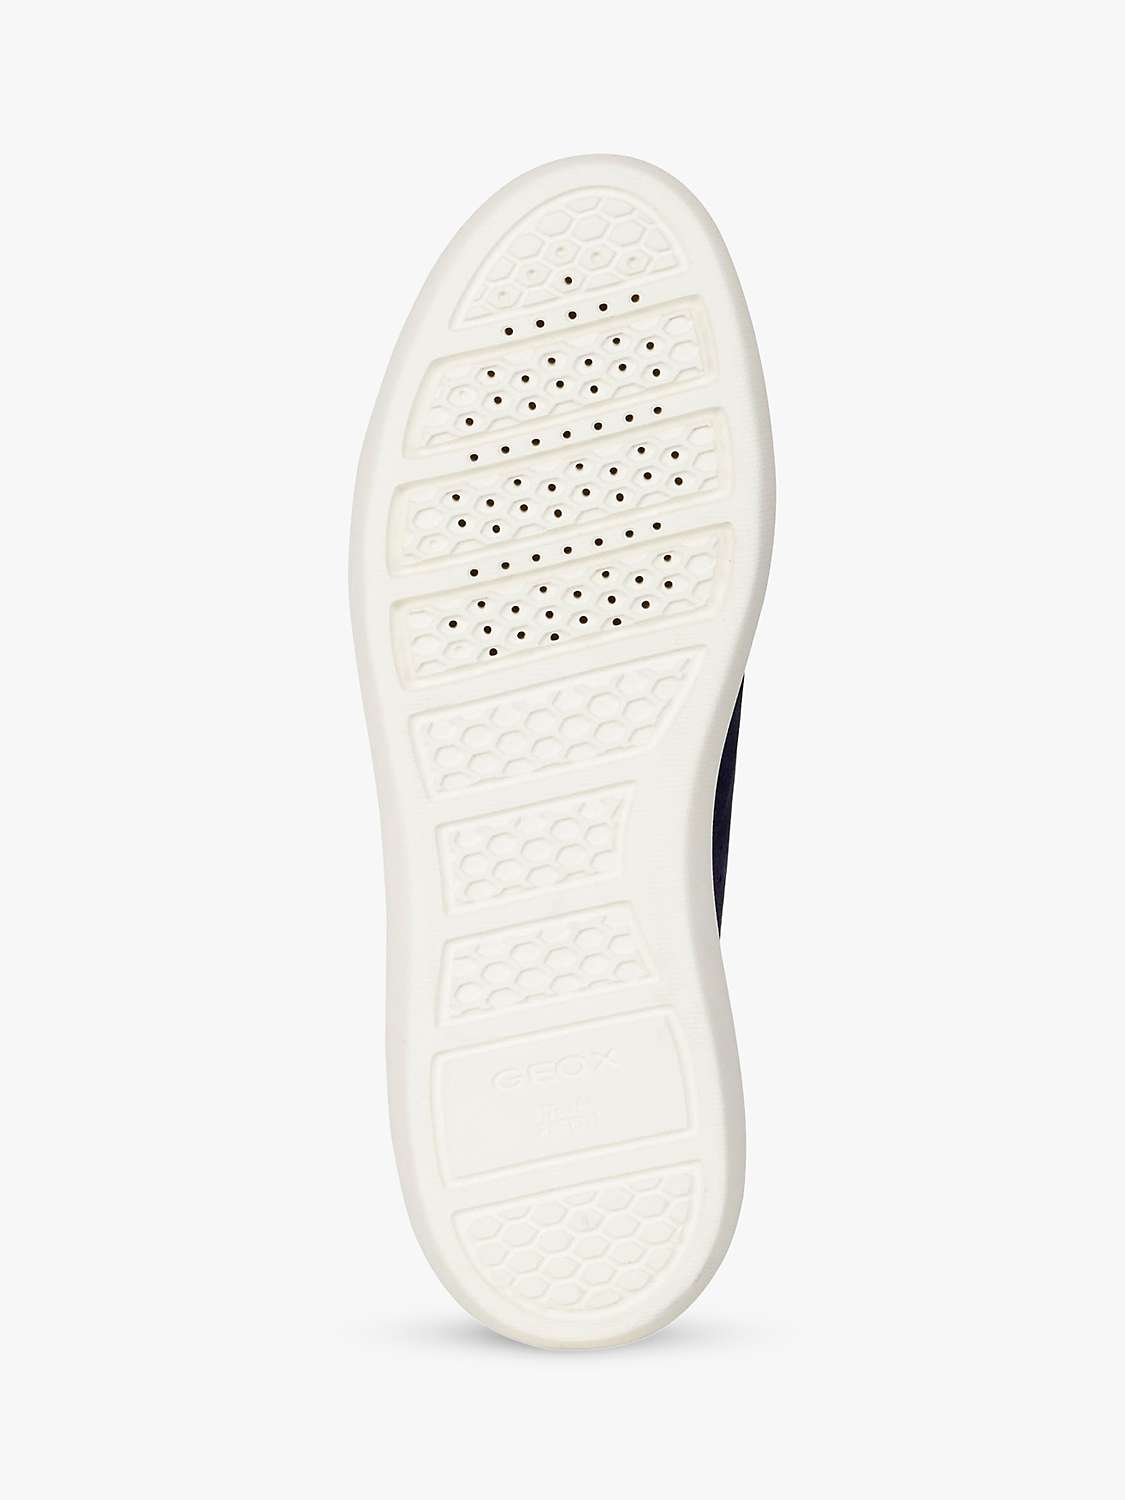 Buy Geox Women's Rubidia Wide Fit Perforated Leather Wedge Trainers Online at johnlewis.com